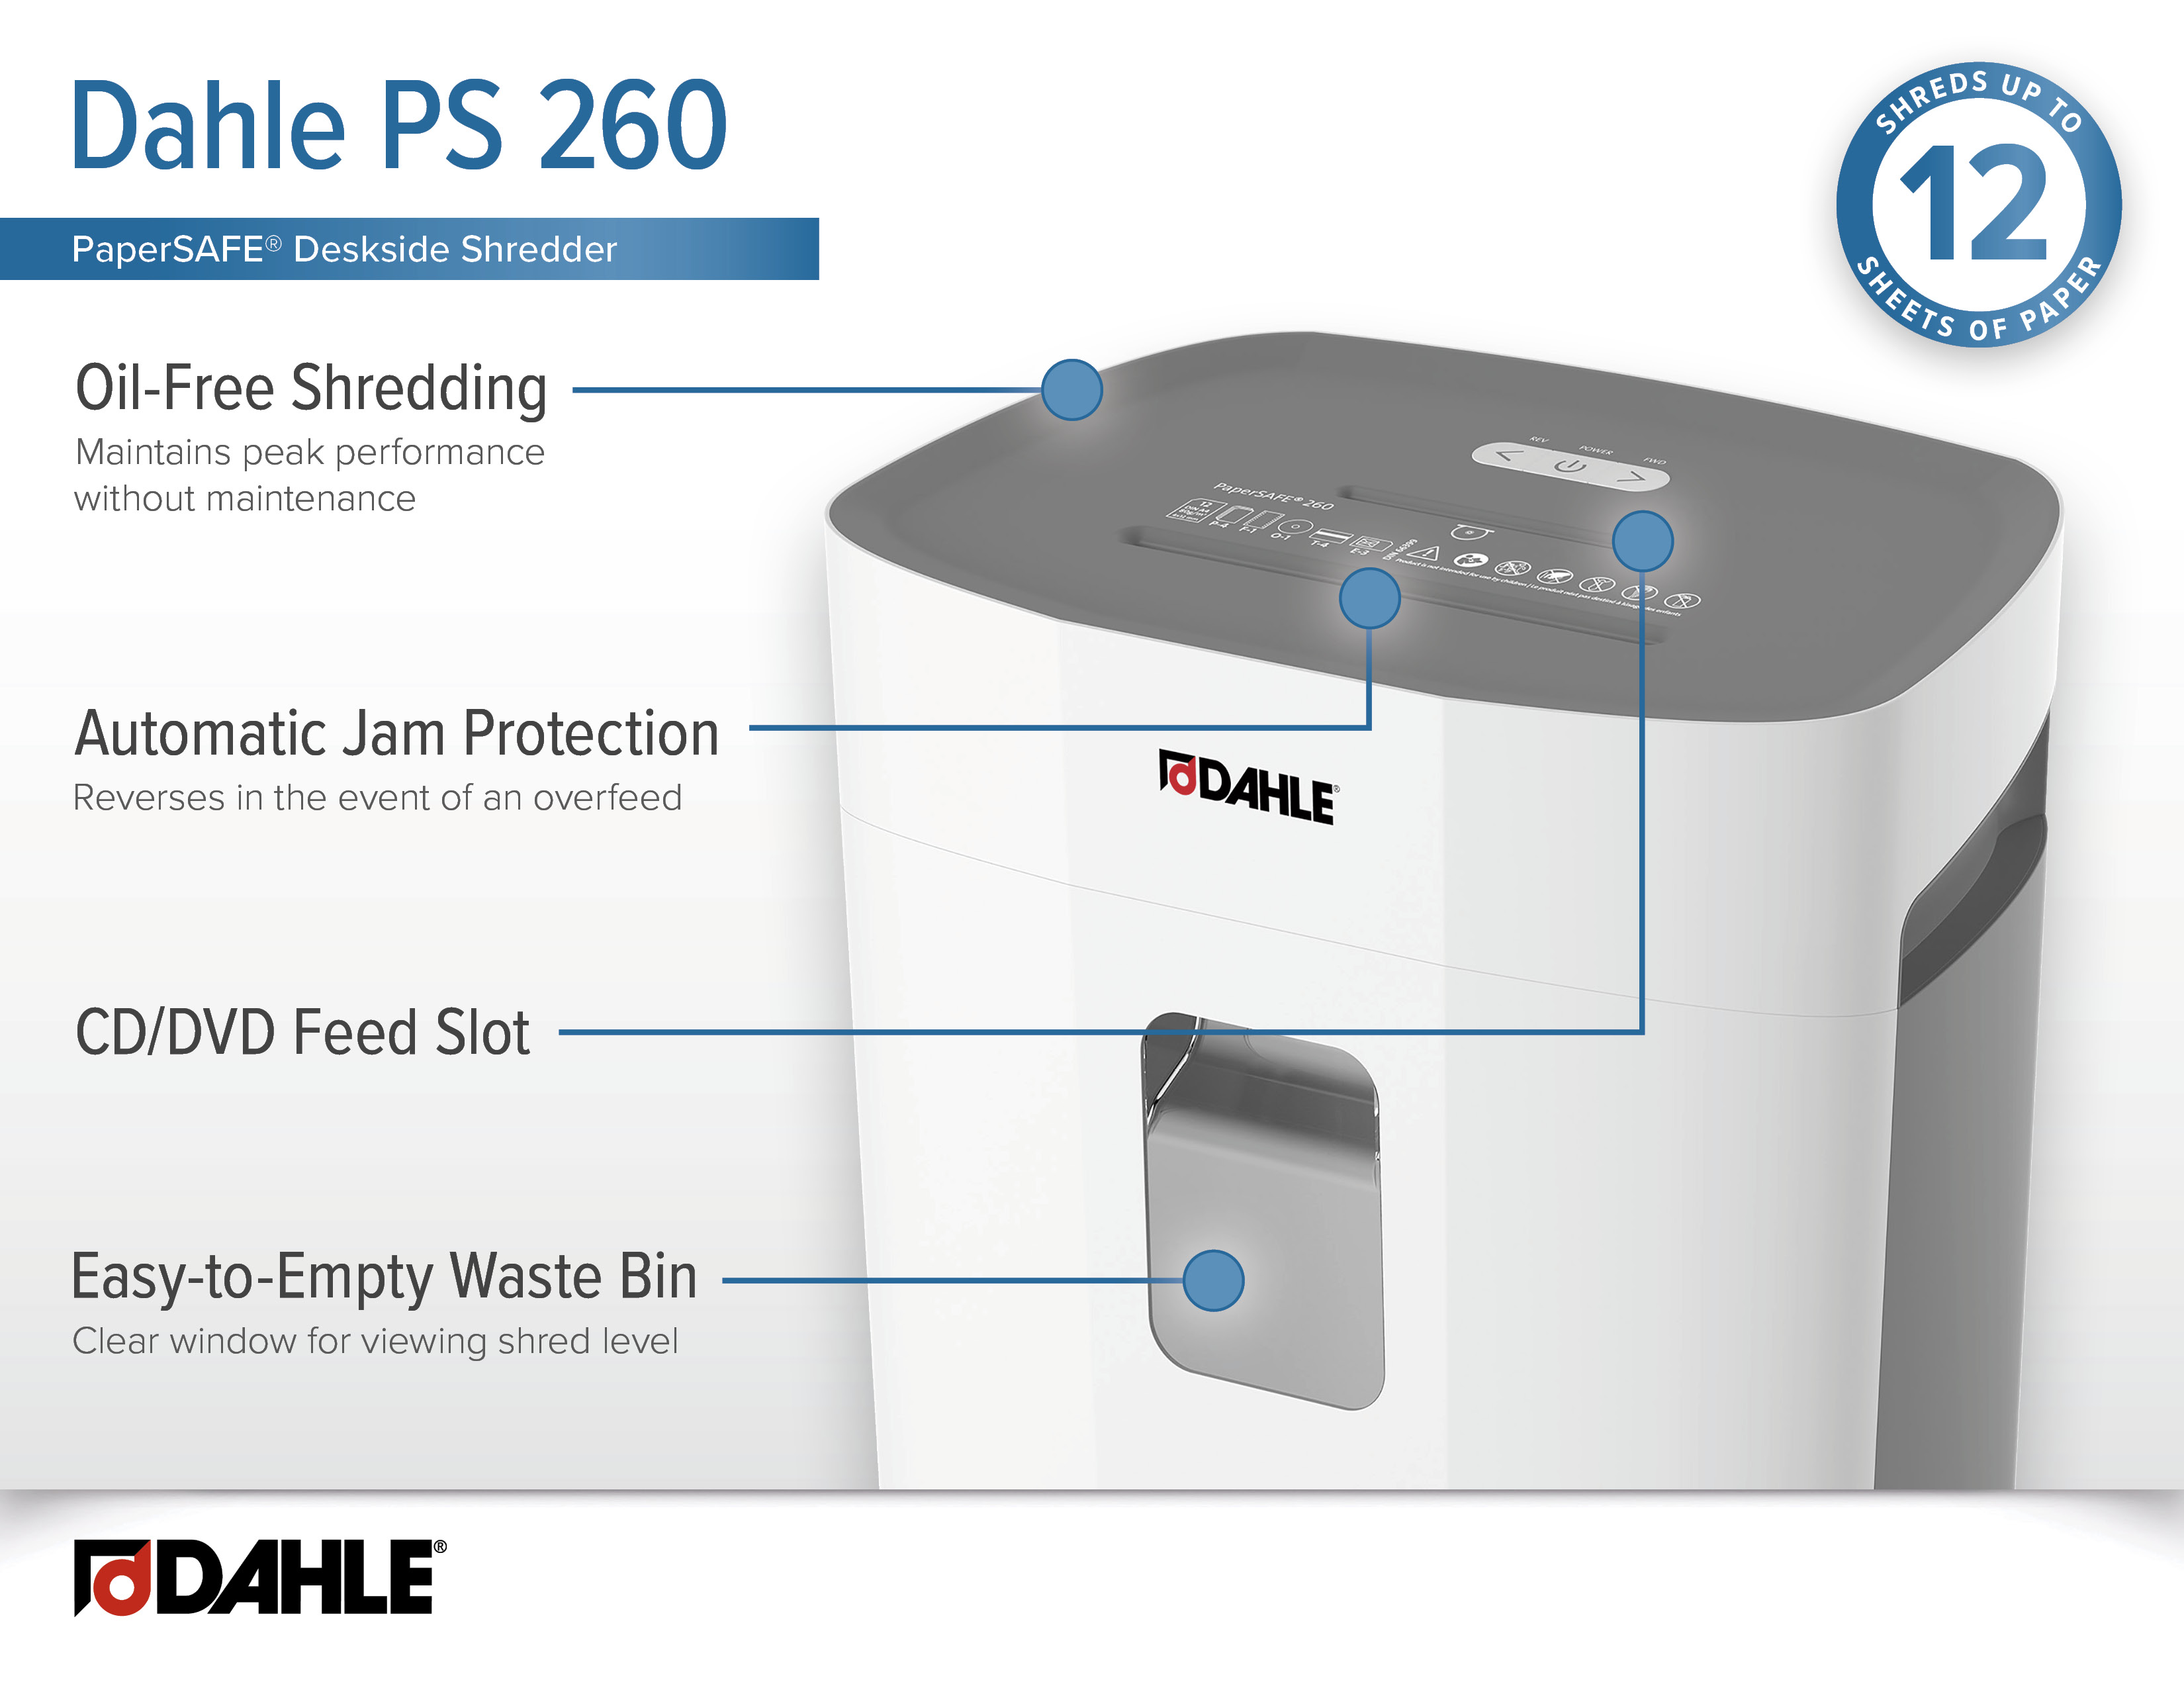 Dahle PaperSAFE 260 Infographic